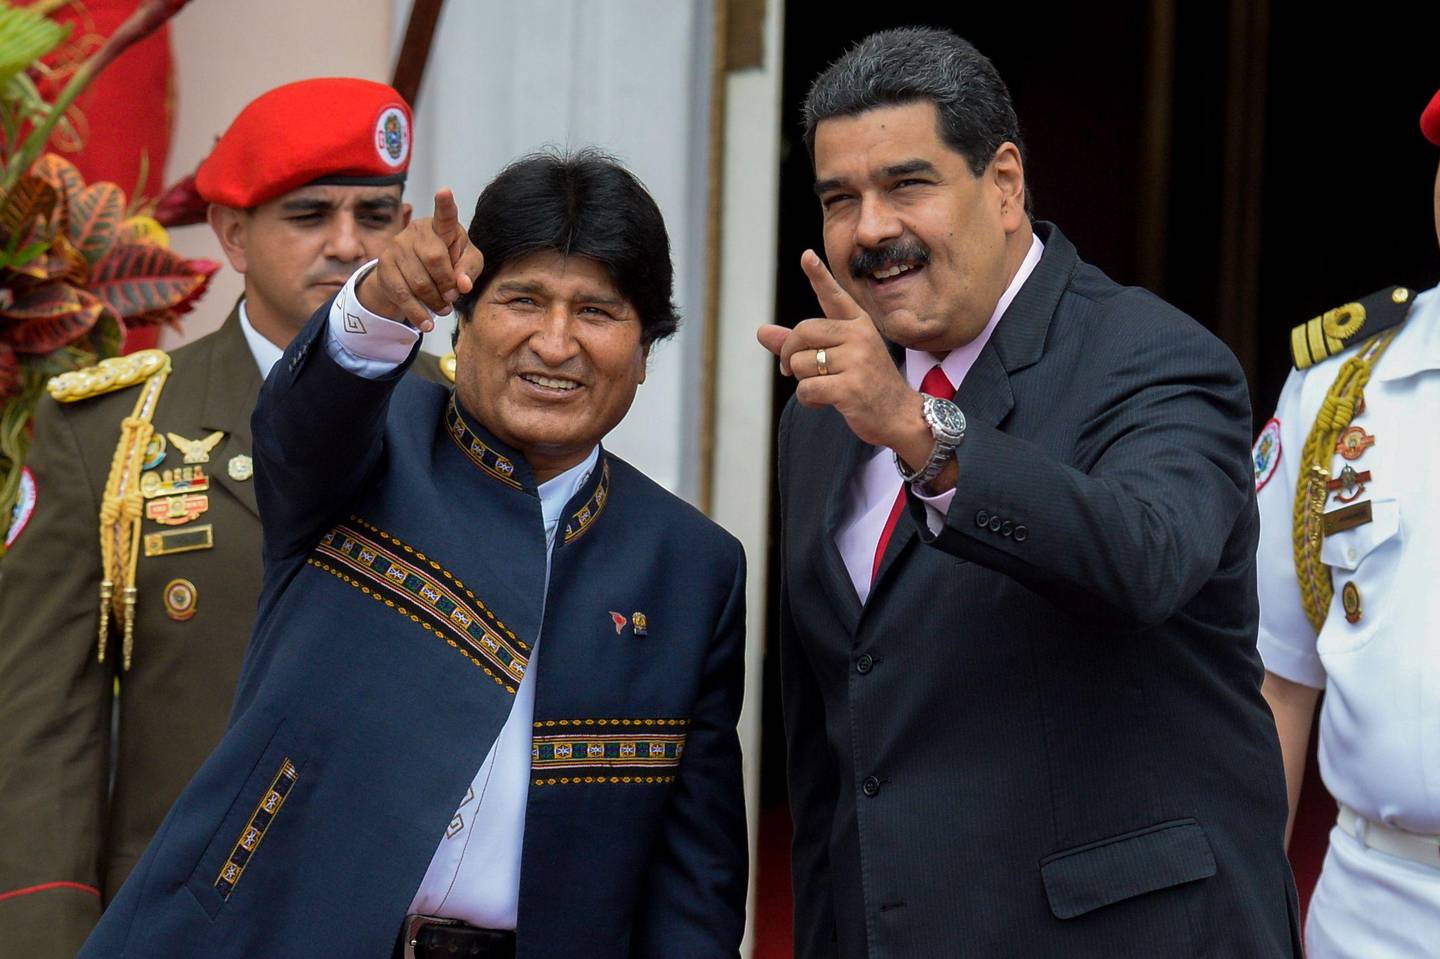 (FILES) In this file photo taken on March 5, 2017 Venezuelan President Nicolas Maduro (R) and Bolivian President Evo Morales gesture during the Bolivarian Alliance for the Peoples of Our America (ALBA) summit at the Miraflores presidential palace in Caracas. - Bolivian President Evo Morales resigned on November 10, 2019, caving in following three weeks of sometimes-violent protests over his disputed re-election after the army and police withdrew their backing. (Photo by Federico PARRA / AFP)